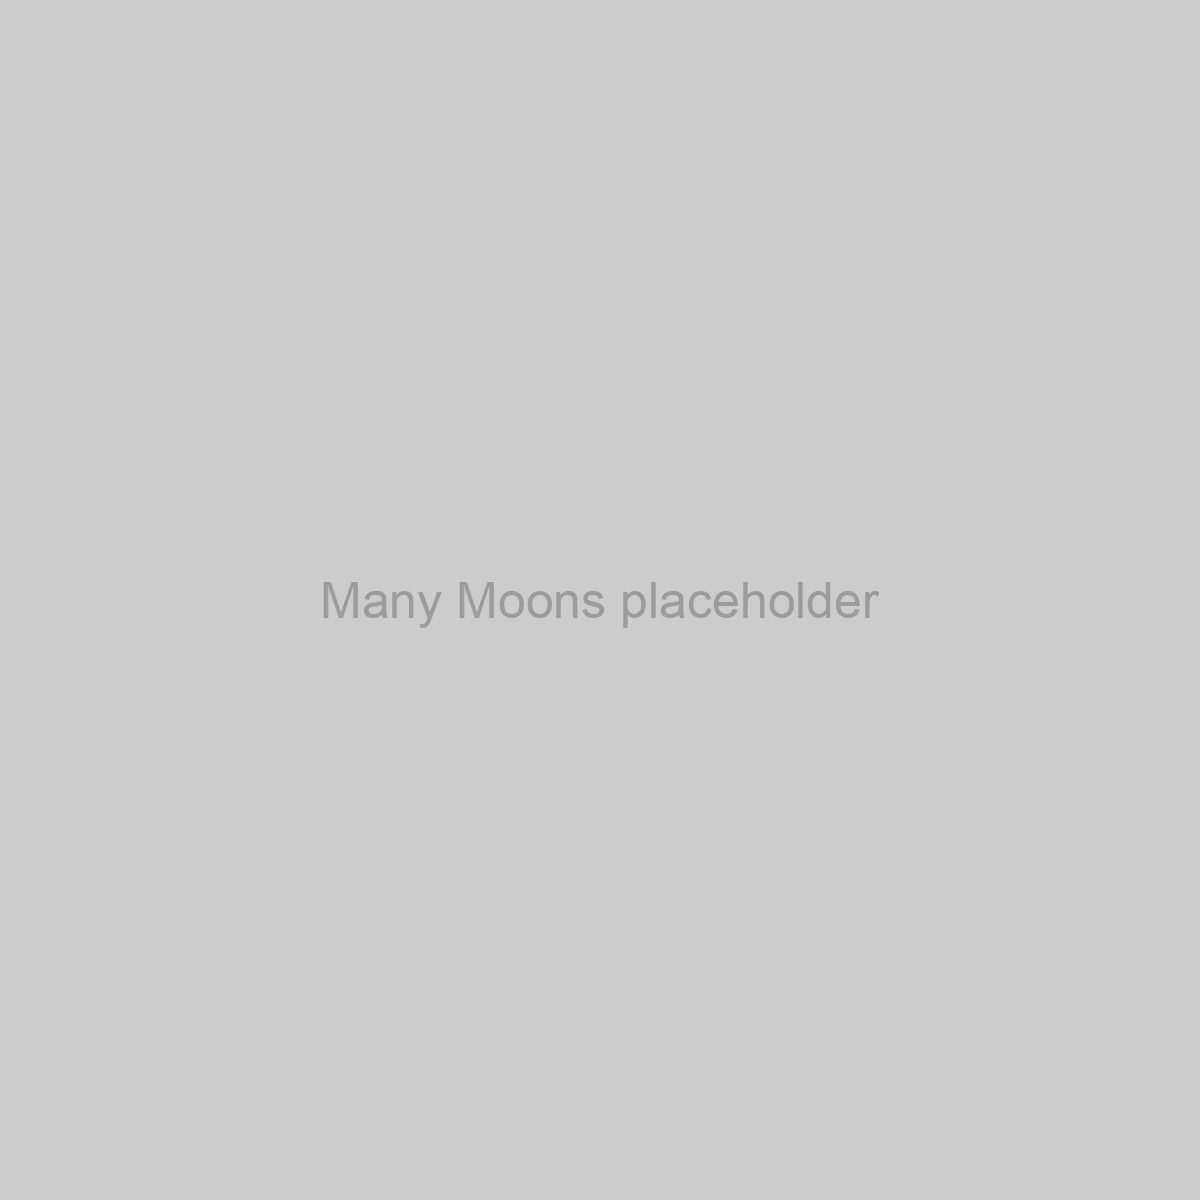 Many Moons Placeholder Image